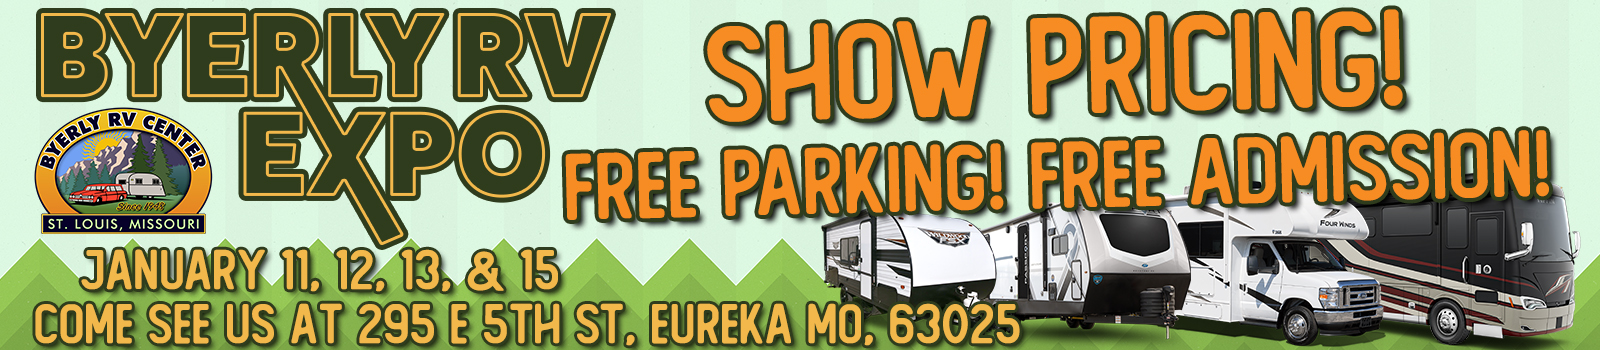 Byerly RV Expo